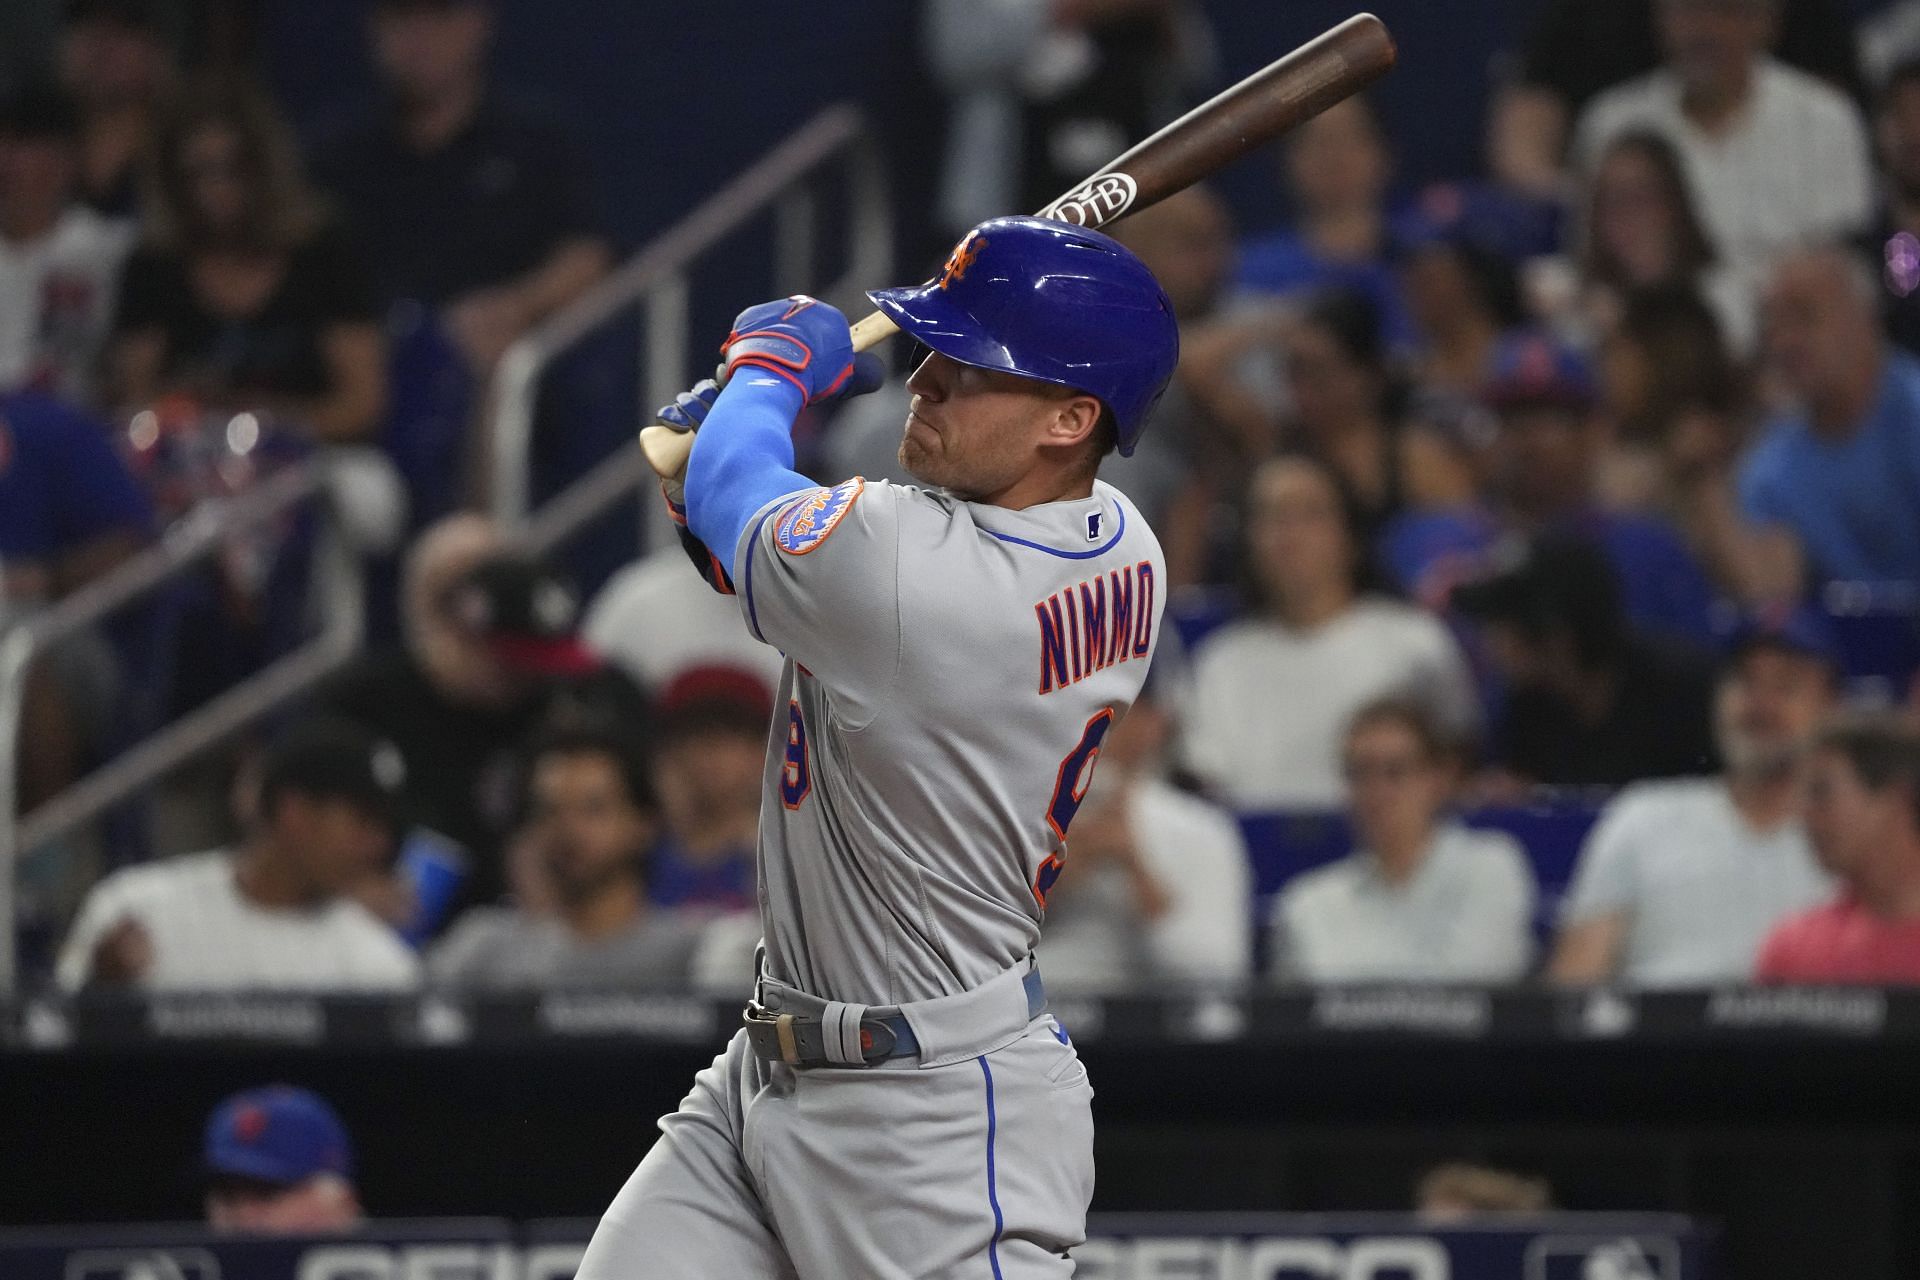 SNY on X: SECOND OF THE NIGHT FOR BRANDON NIMMO!